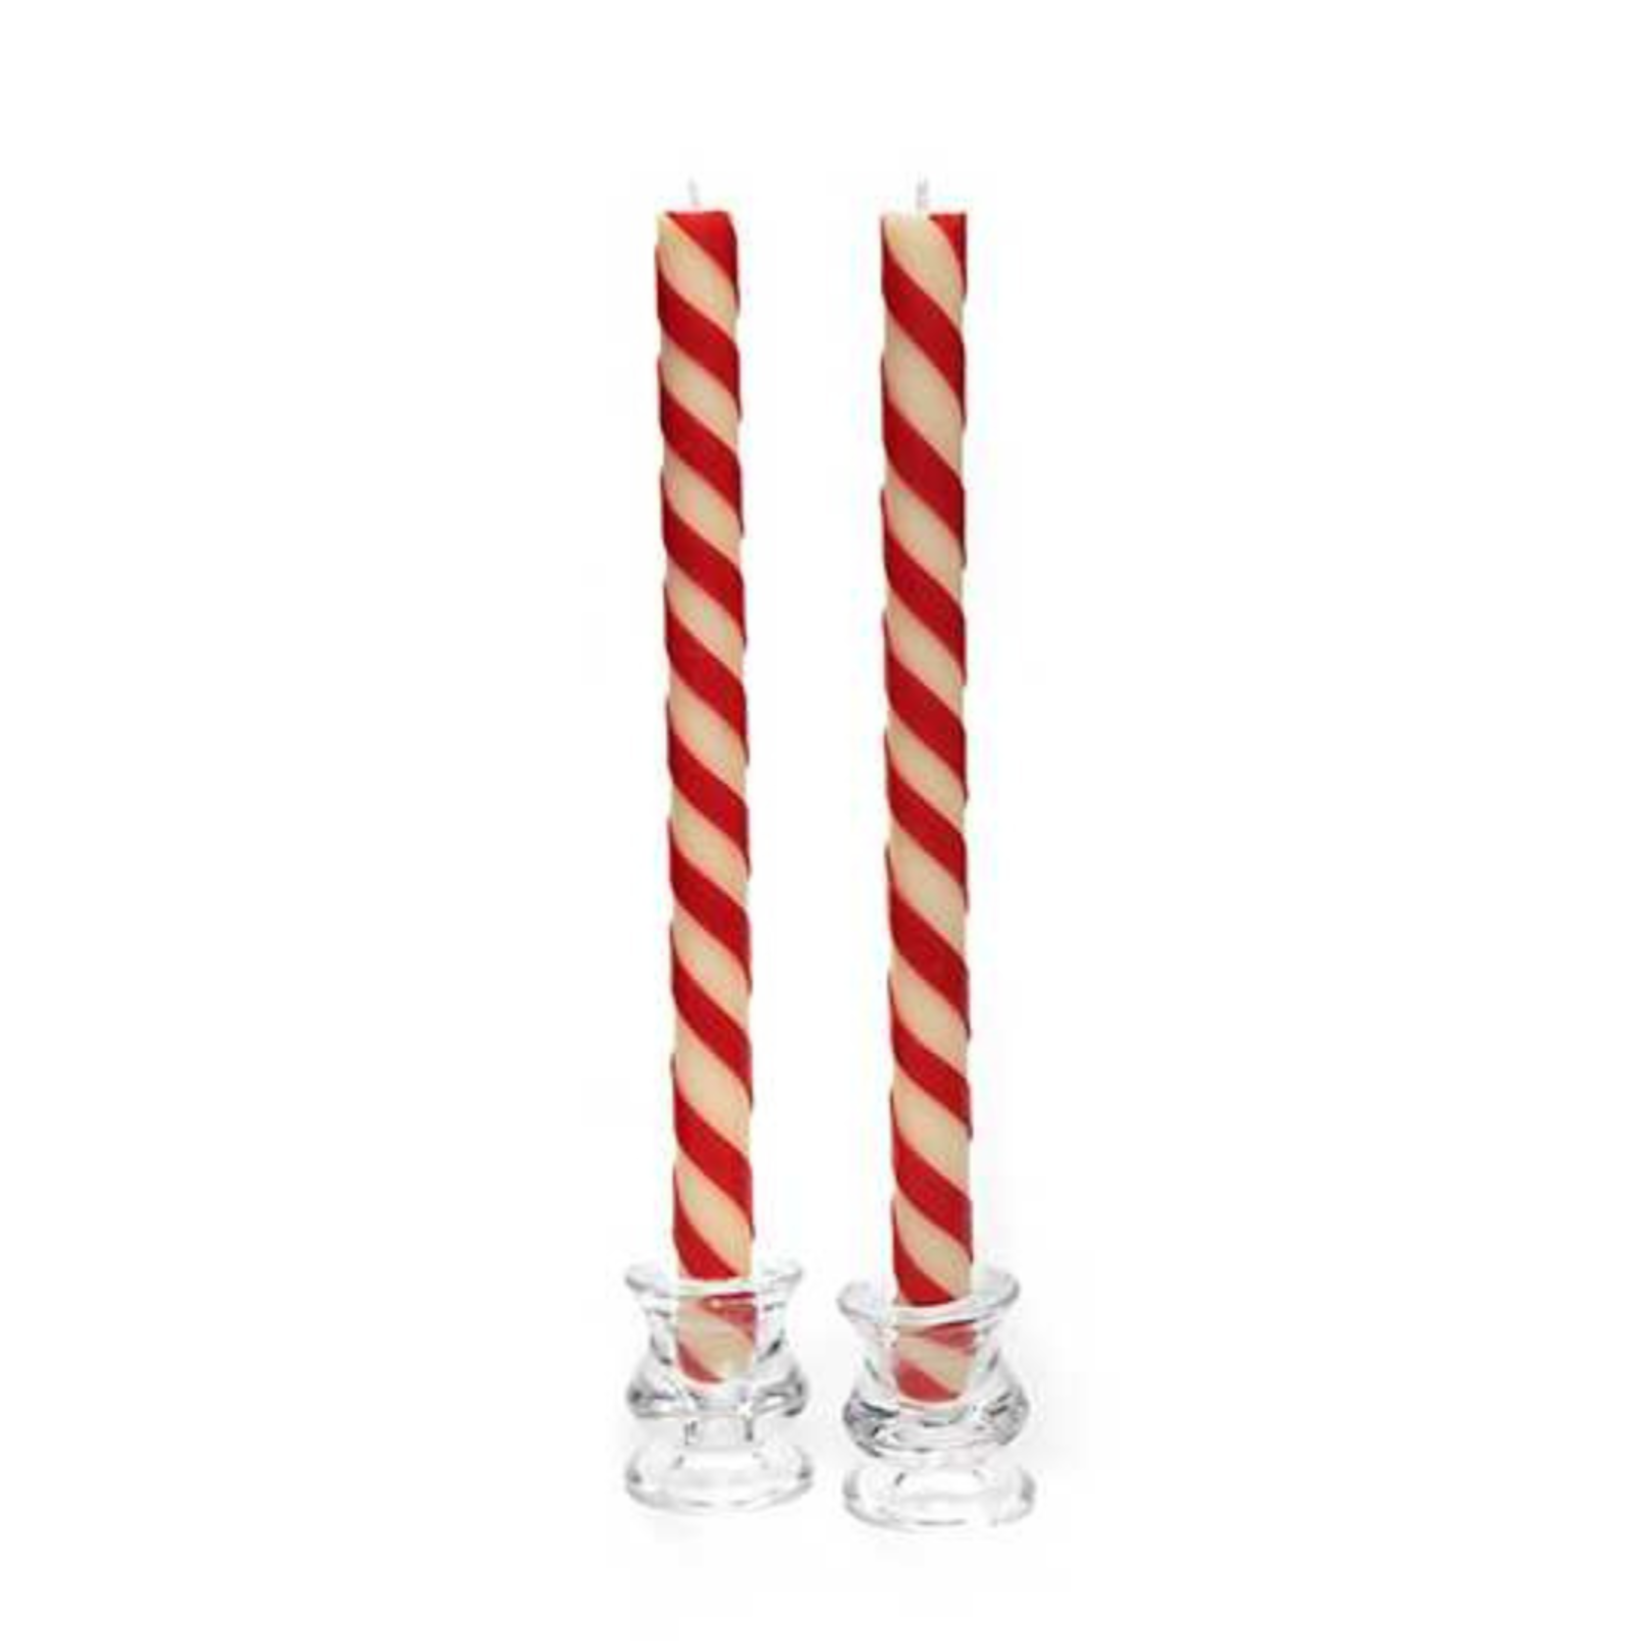 MacKenzie-Childs Candy Cane Dinner Candles - Set of 2